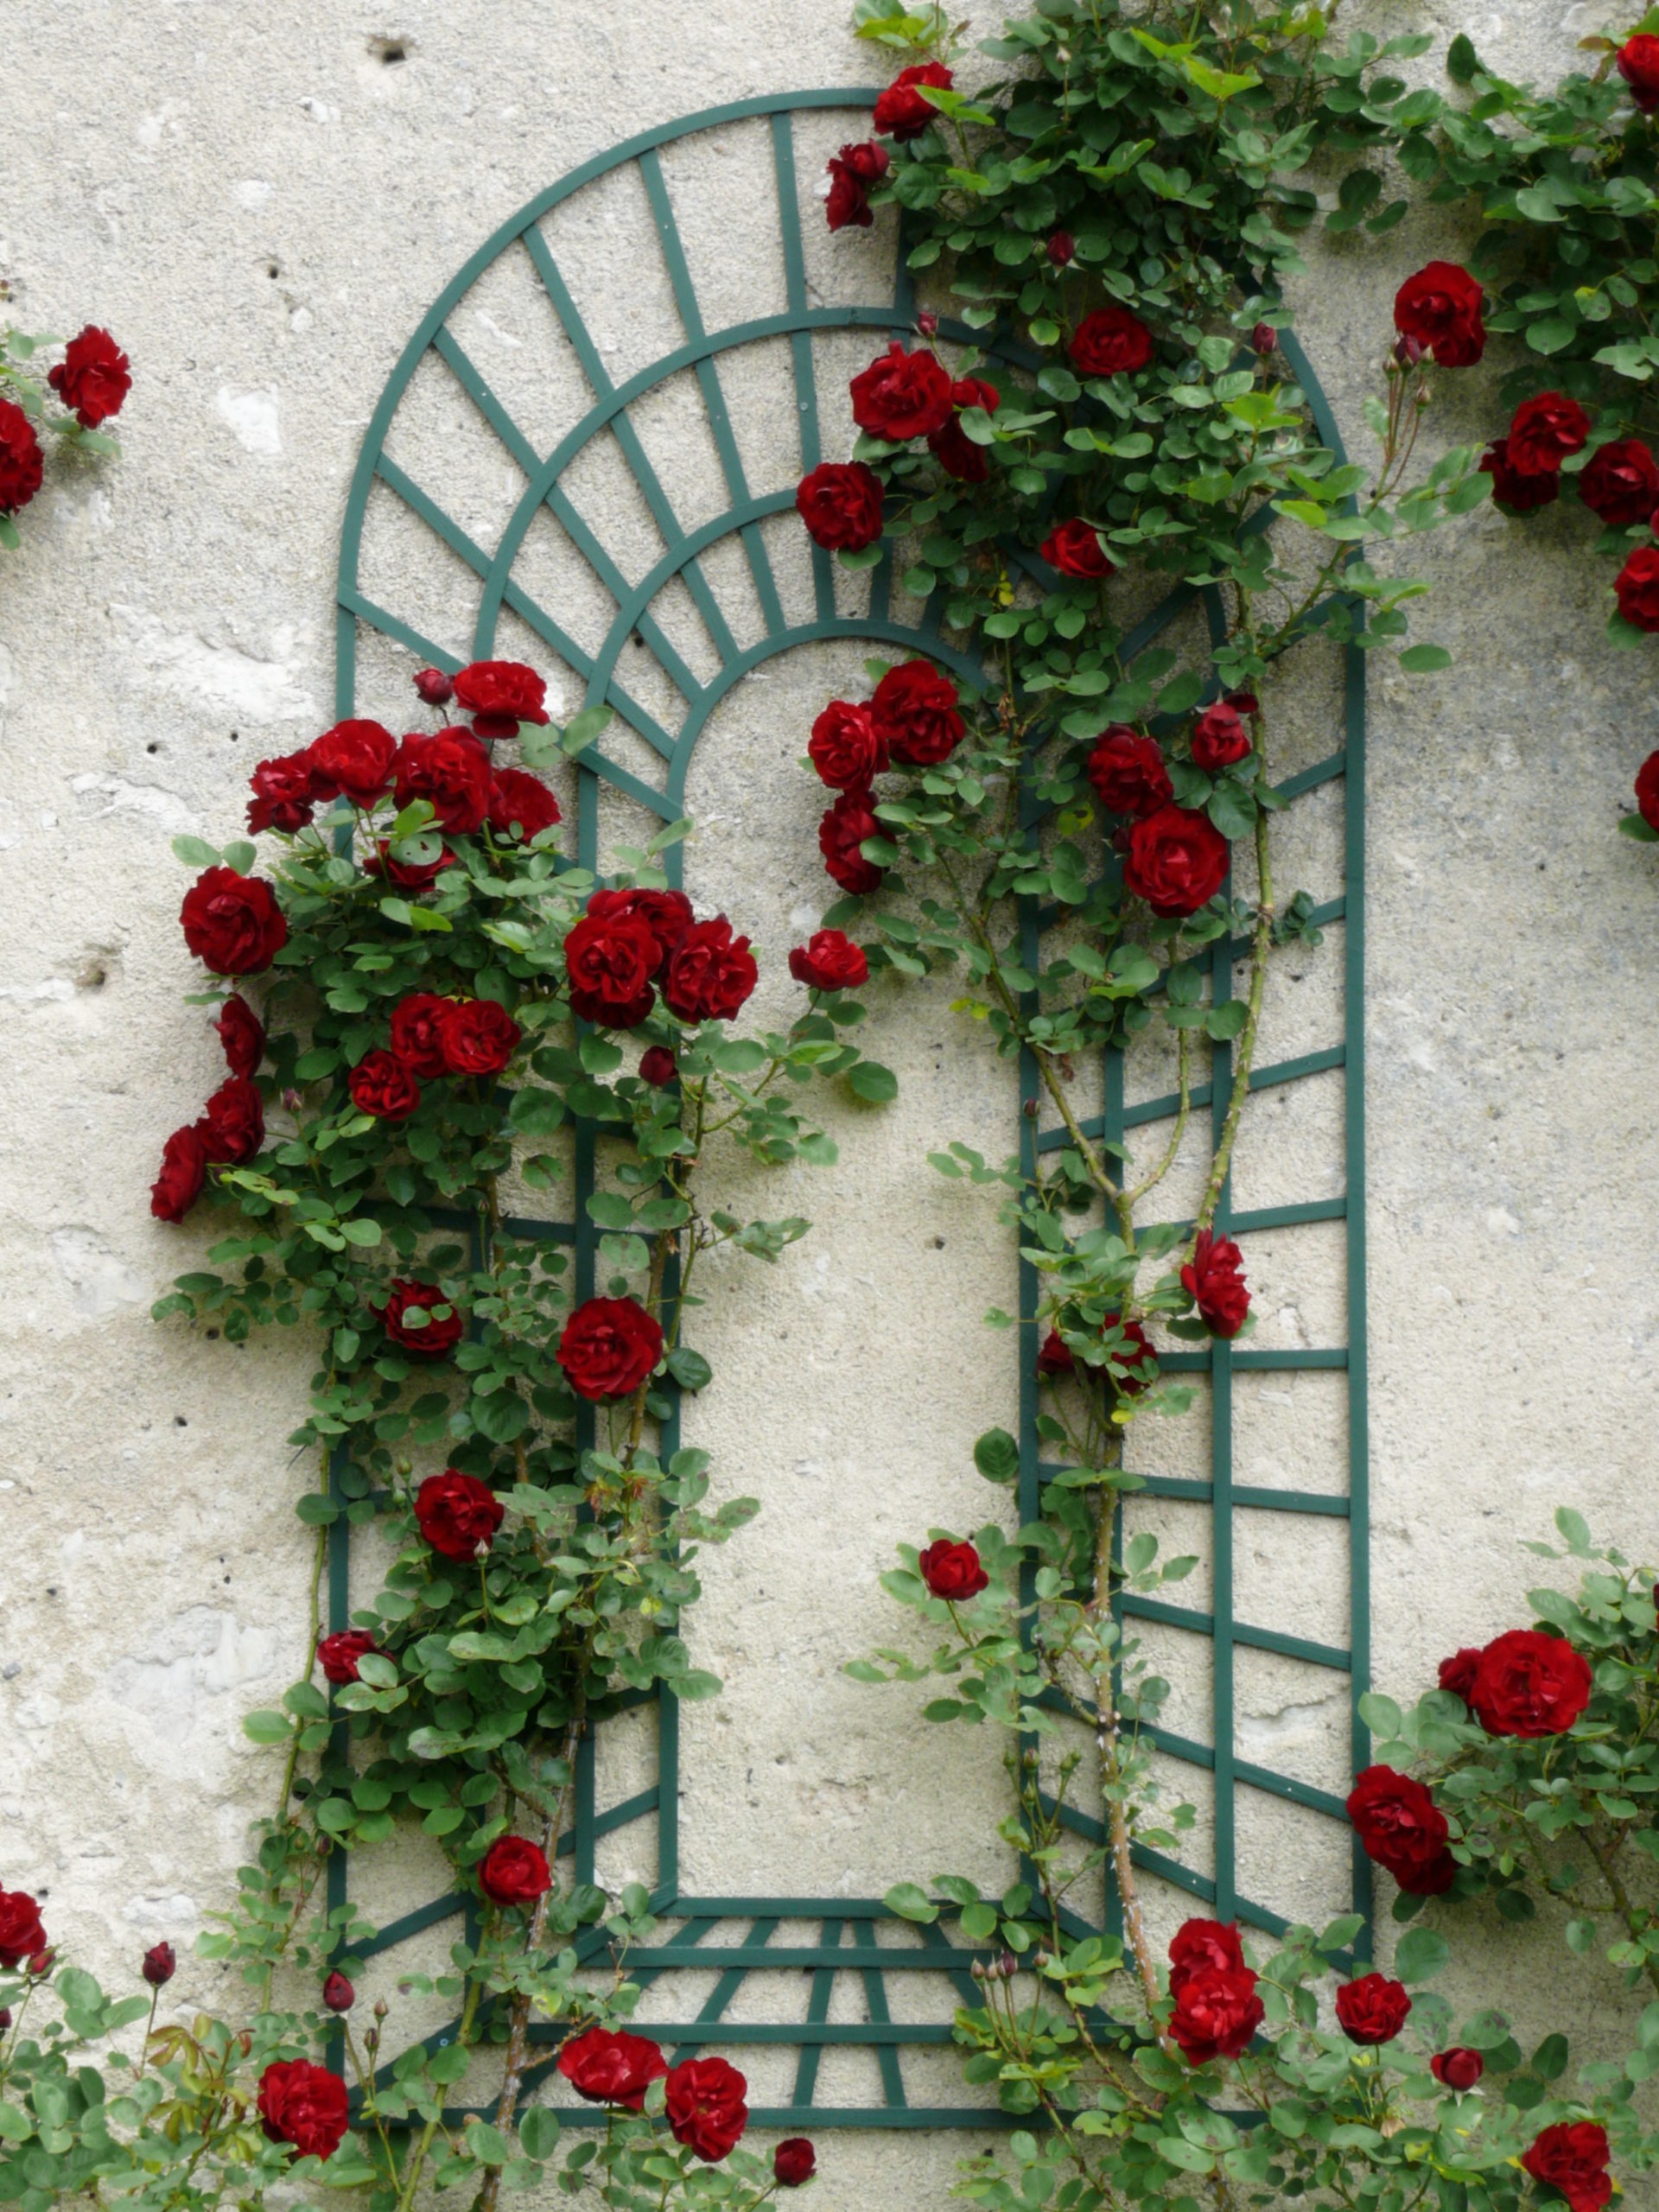 Rose inspiration from Loire Valley